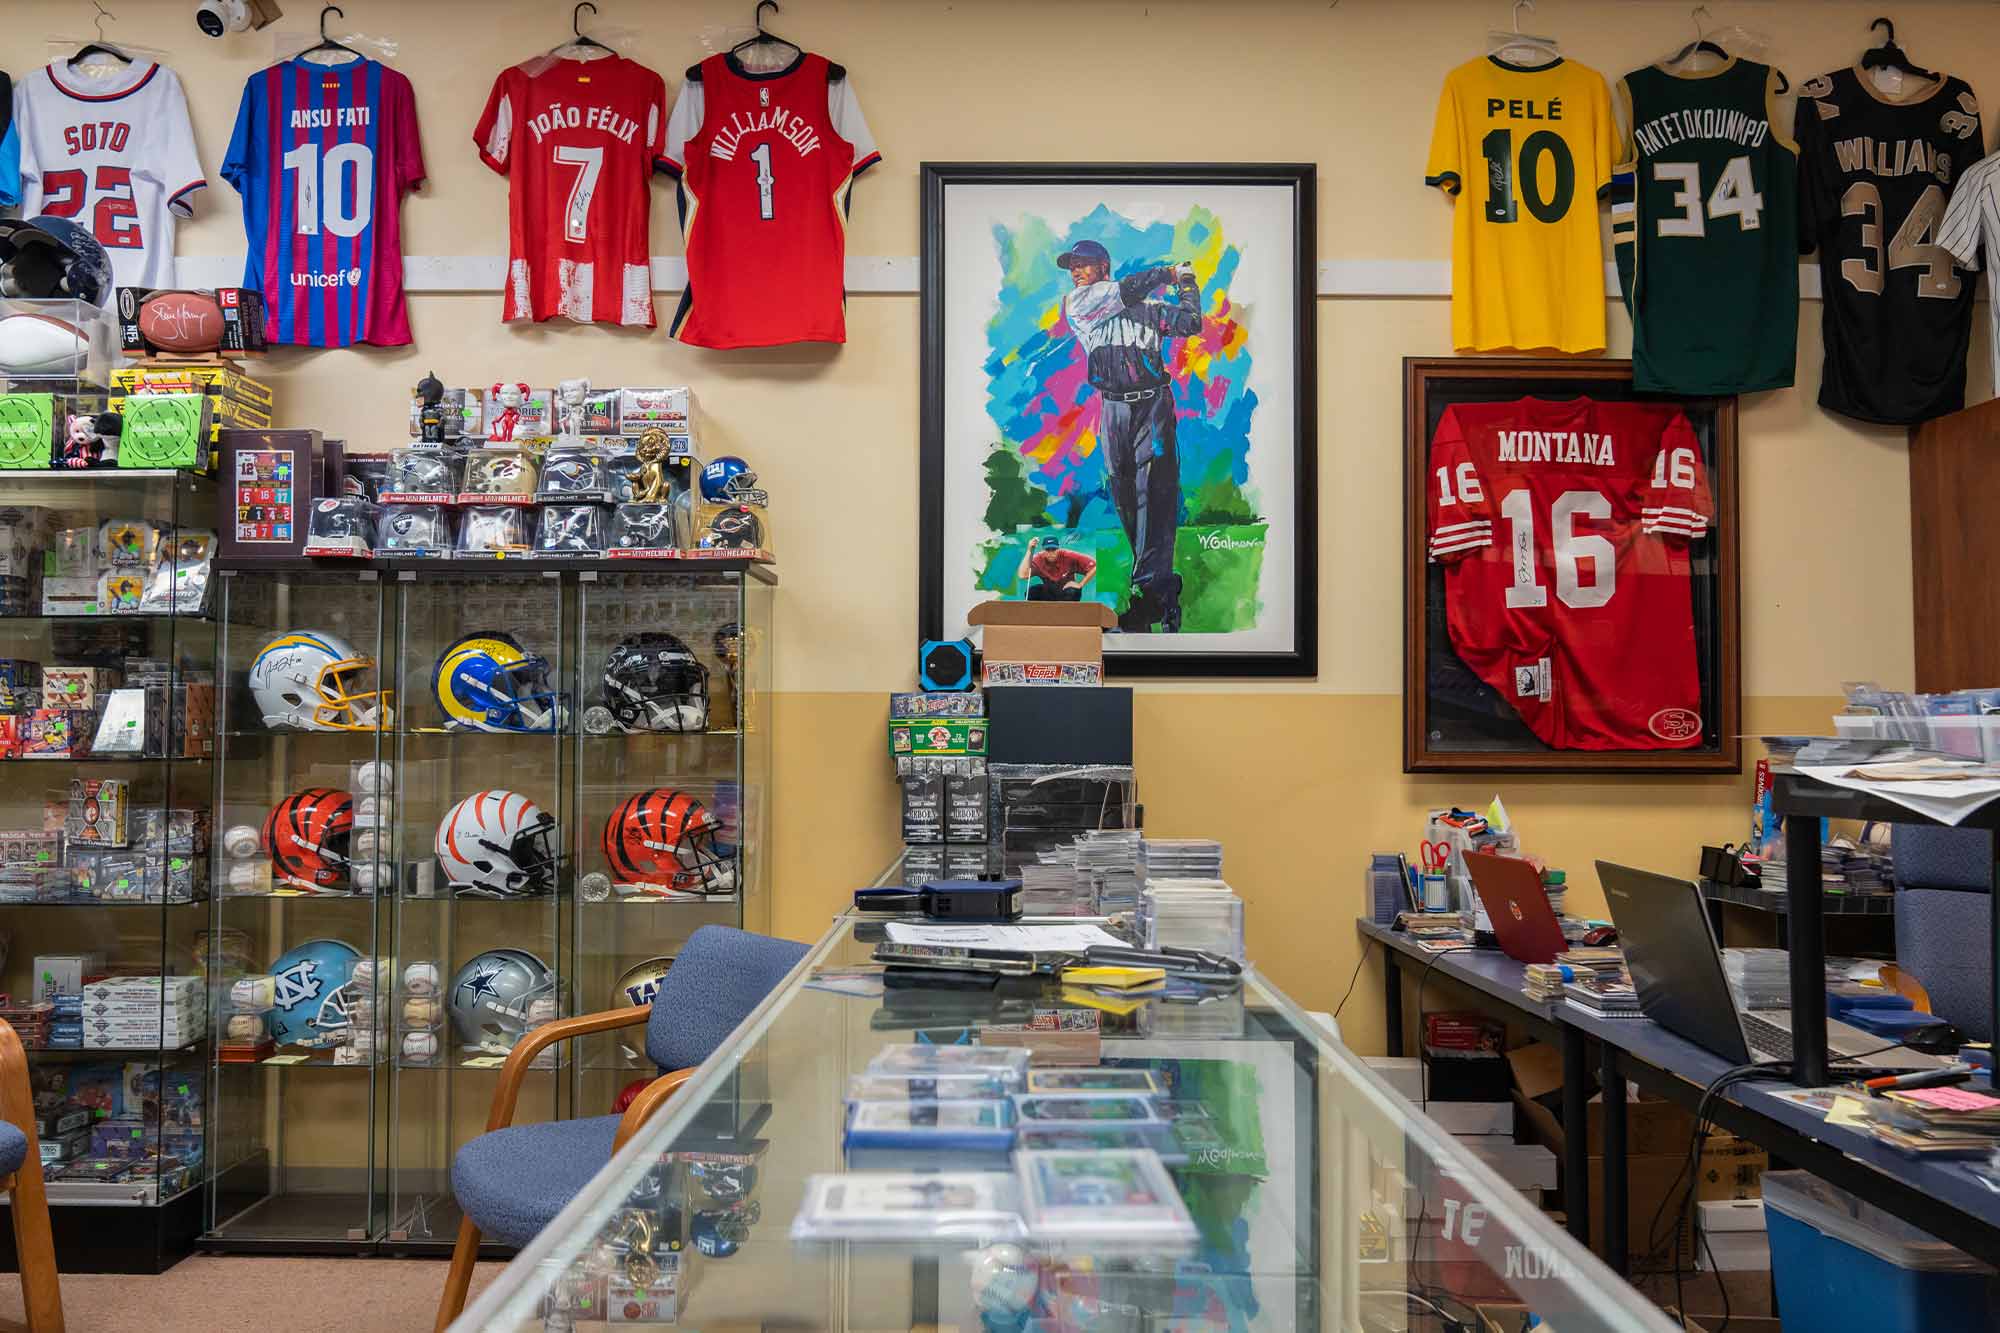 The interior of the shop includes a glass display case full of cards and other memorabilia, as well as hanging jerseys and shelves of football helmets